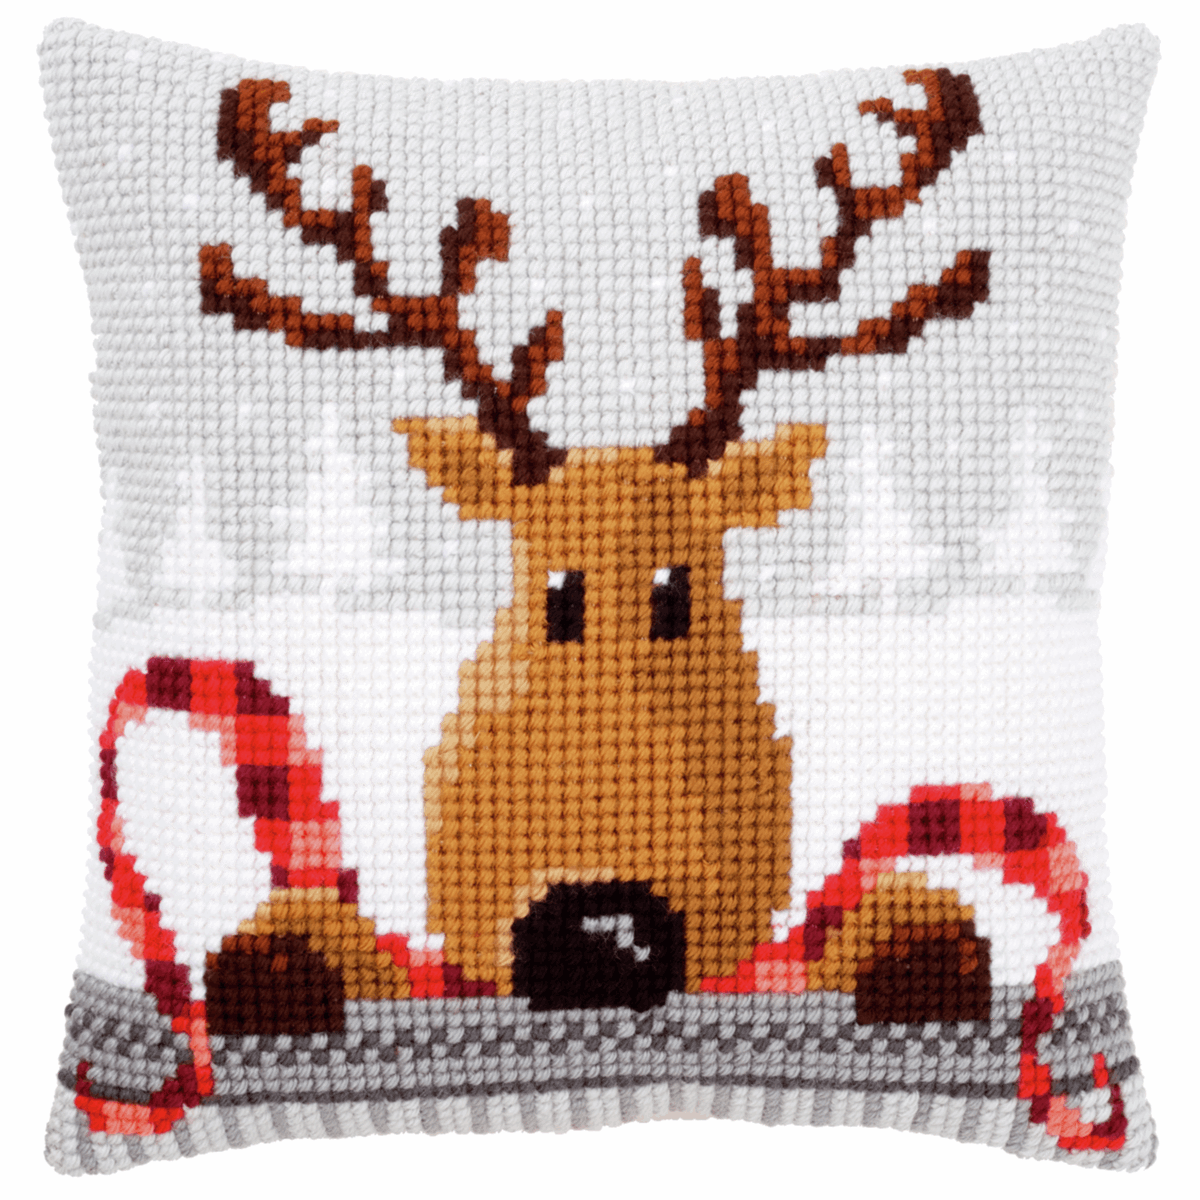 Reindeer with a Red Scarf - Vervaco Cushion Cross Stitch Kit PN-0148051